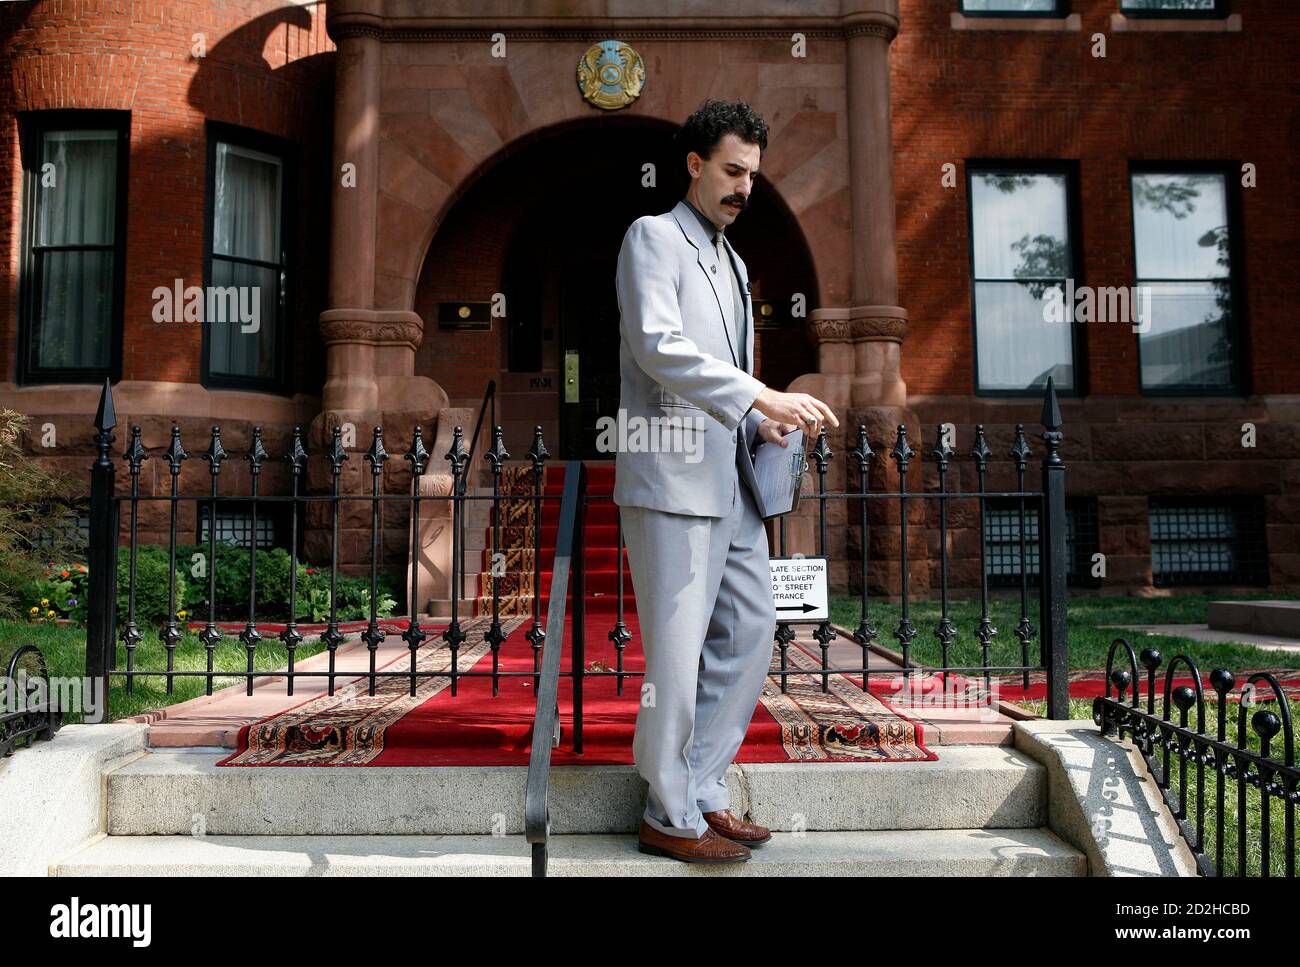 Actor Sacha Baron Cohen in the role of ficticious Kazakh journalist Borat Sagdiyev fails to enter the Kazakh Embassy in Washington, September 28, 2006. Cohen was attempting to deliver an invitation to Kazakh President Nursultan Nazarbayev for the opening of his movie entitled 'Borat: Cultural Learnings of America for Make Benefit Glorious Nation of Kazakhstan'.   REUTERS/Joshua Roberts   (UNITED STATES) Stock Photo